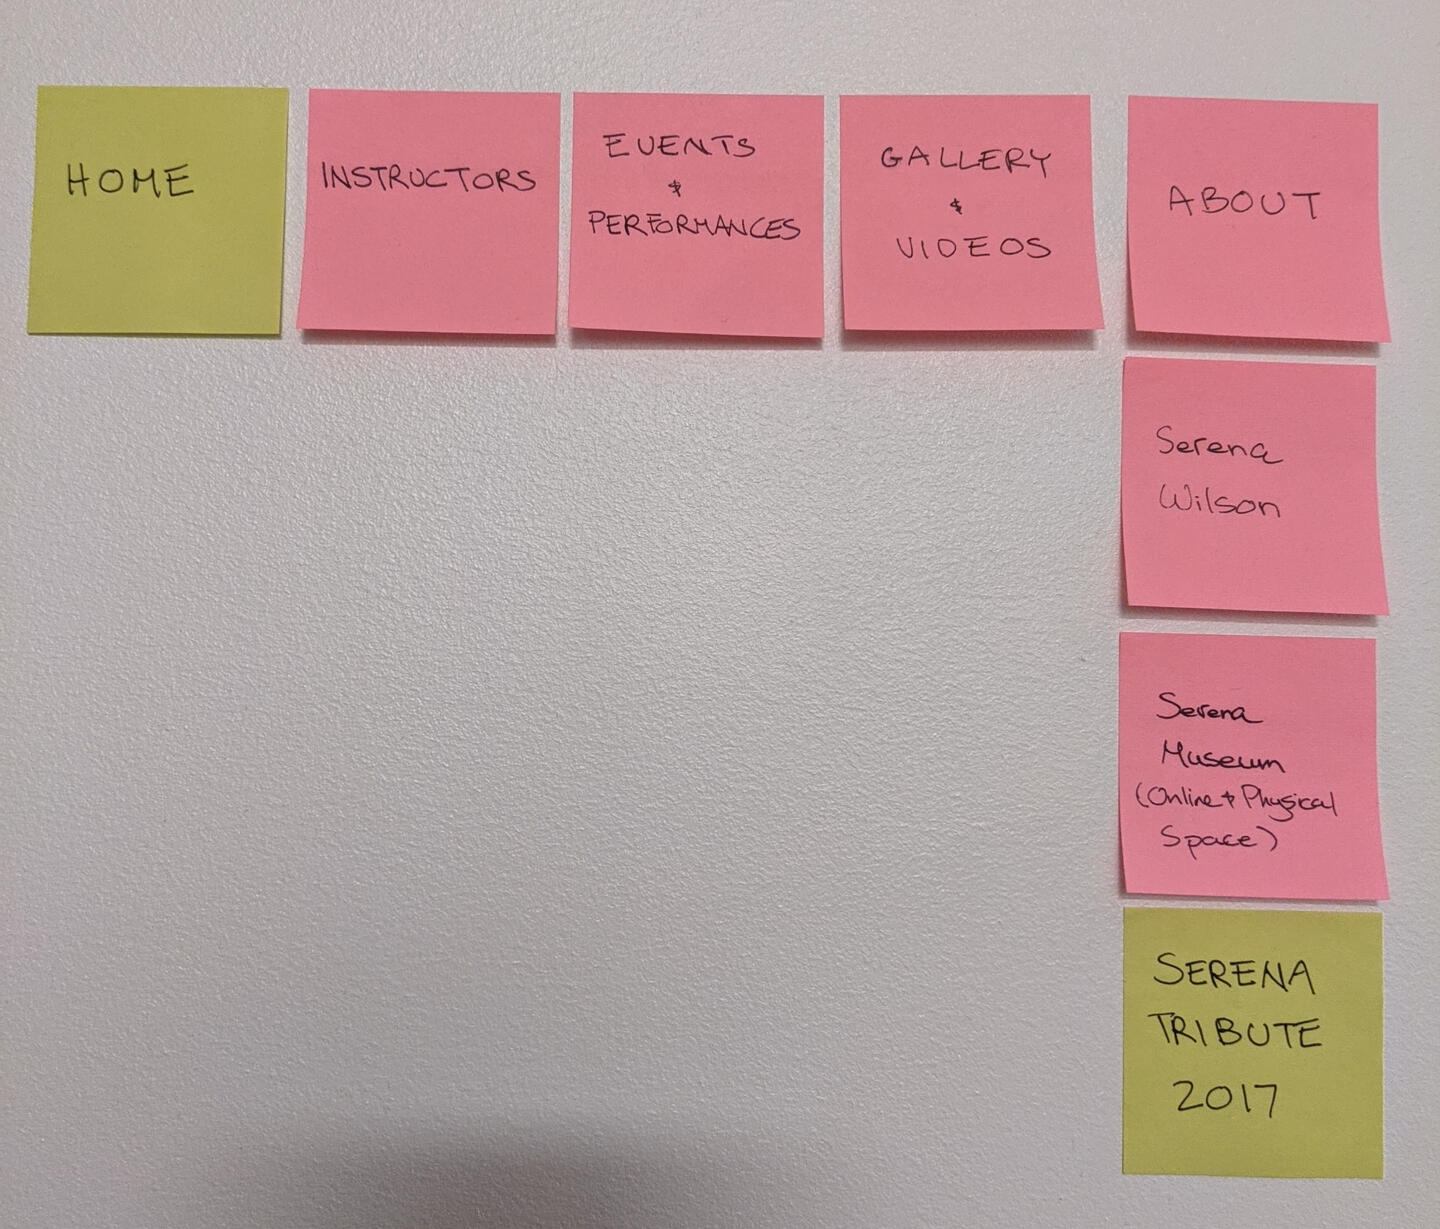 Second round of post-its for navigation, simplifying it.